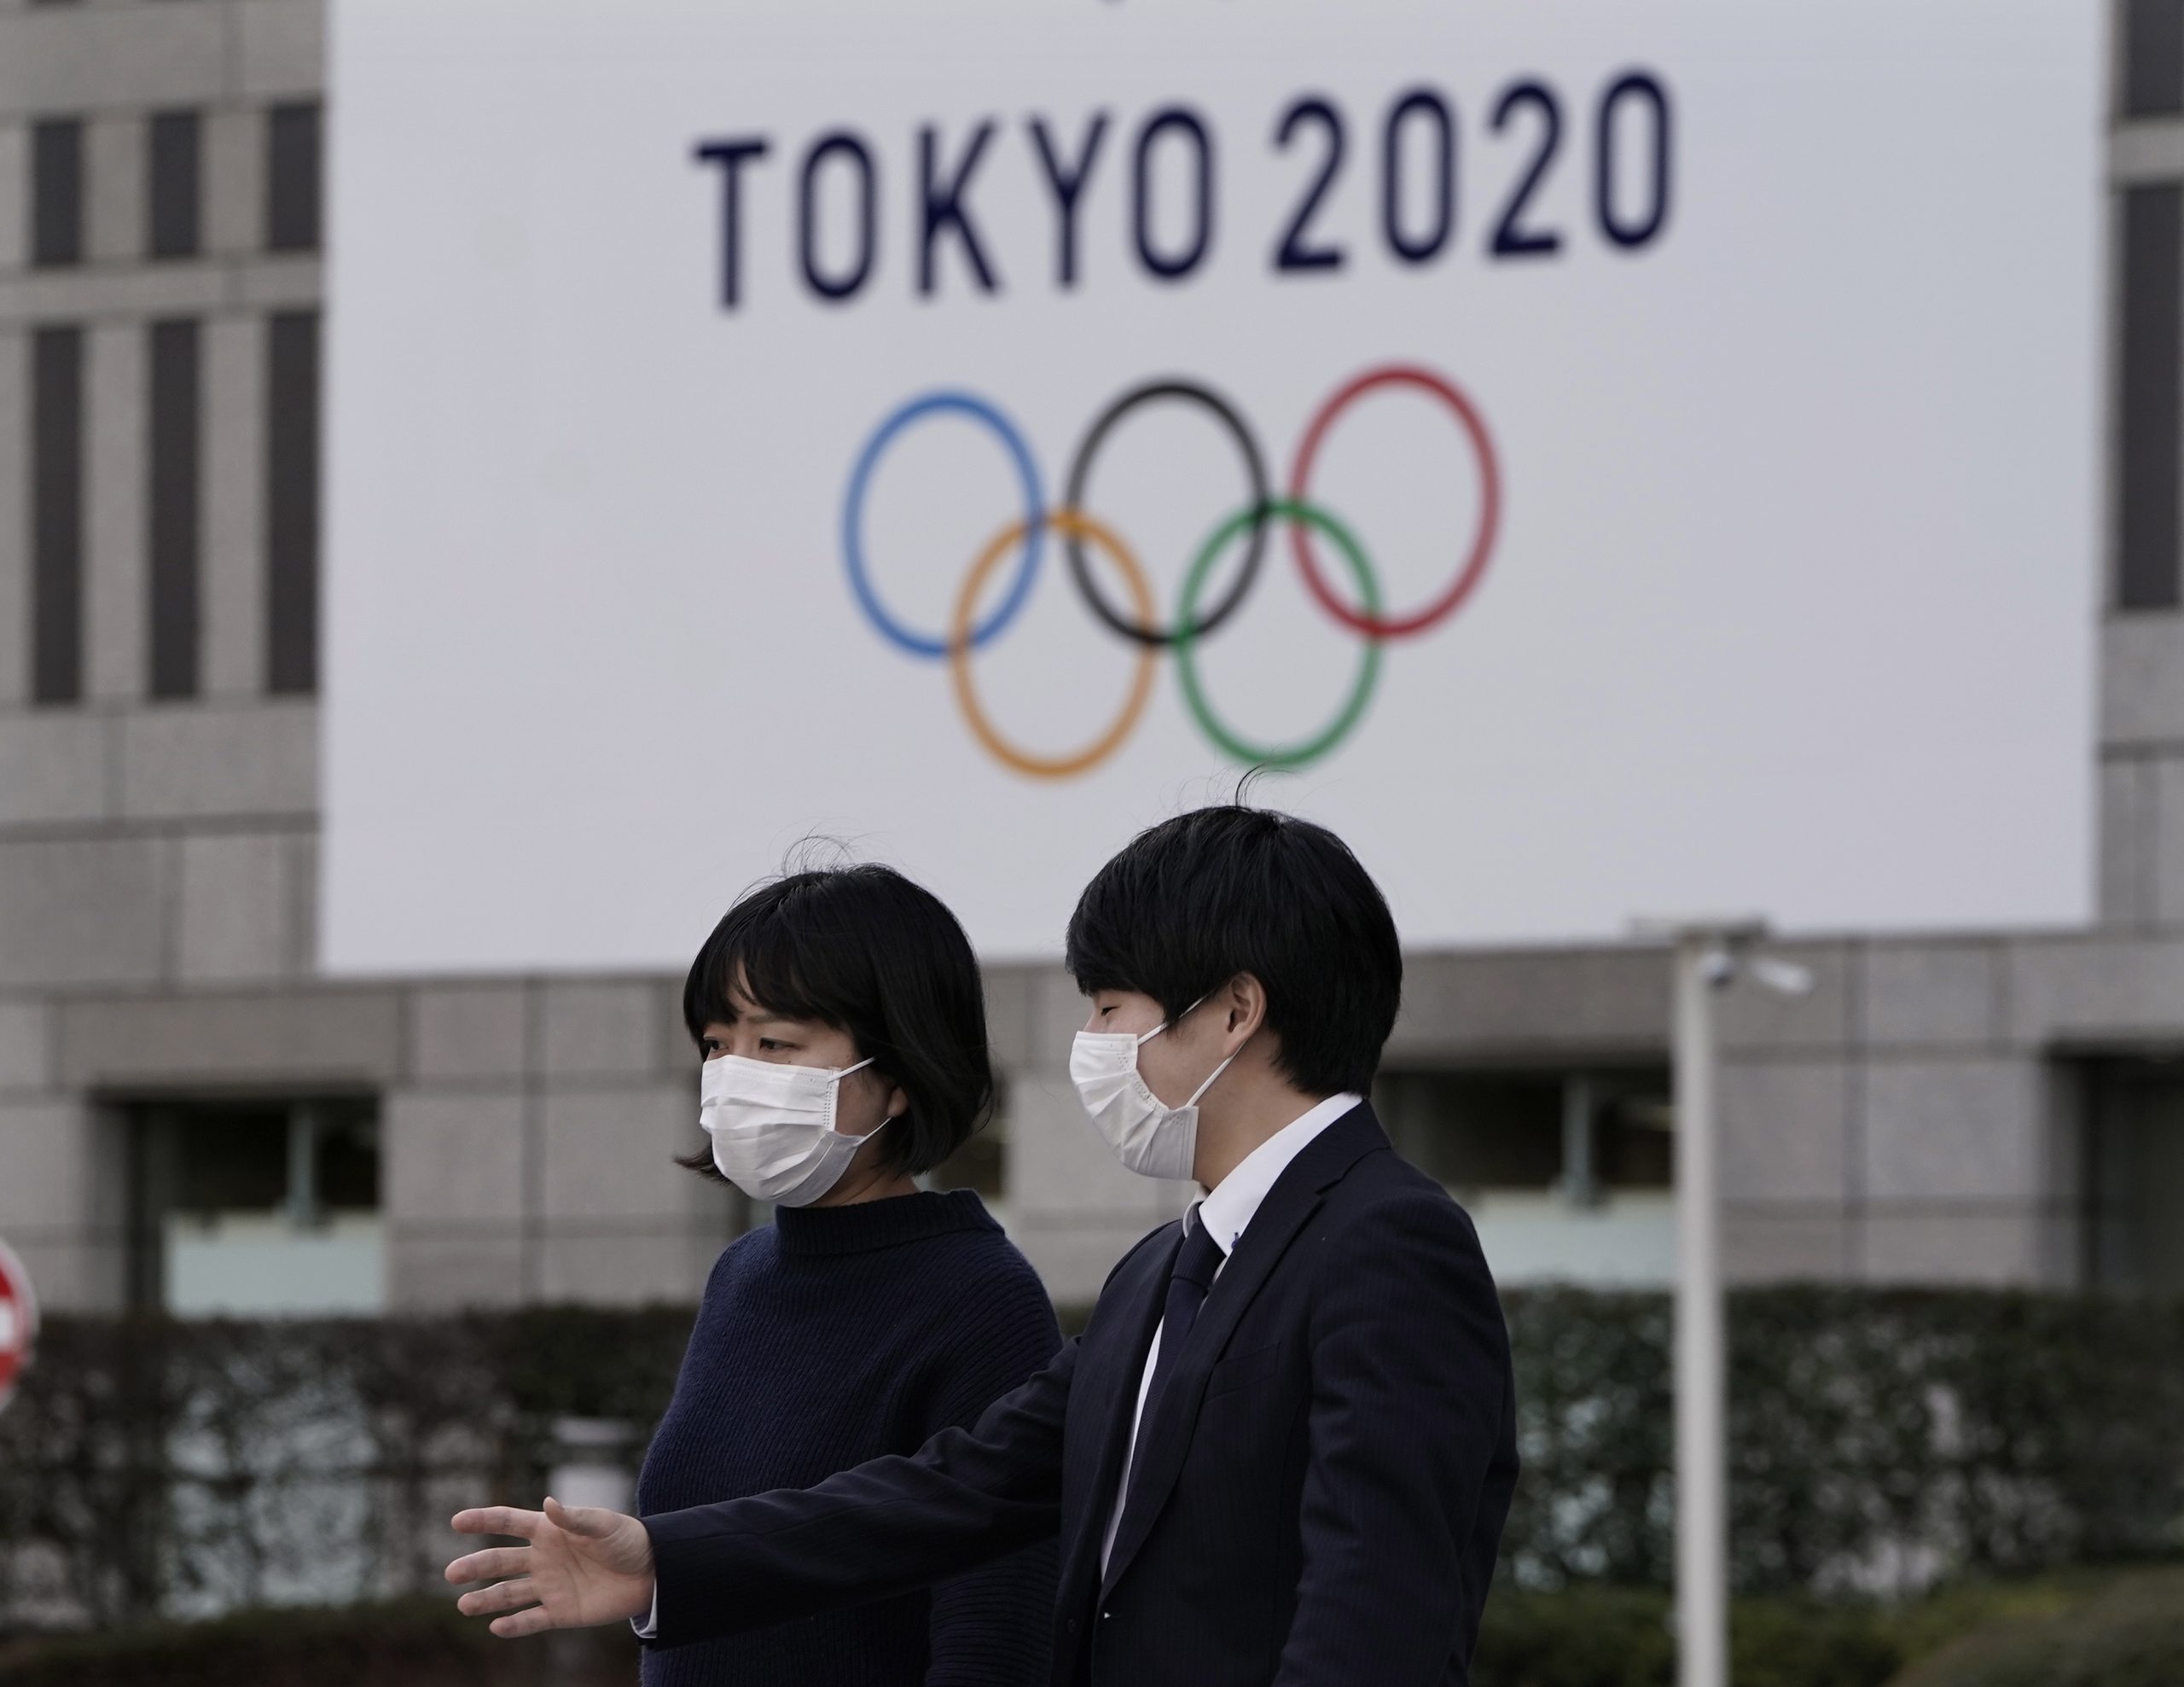 epa08314049 (FILE) - A file picture of pedestrians wearing masks walking past the emblem of the Tokyo 2020 Olympic Games displayed on a wall of Tokyo Metropolitan Government headquarters in Tokyo, Japan, 28 February 2020.  IOC informed on 22 March 2020 that they agreed for a time limit of 4 weeks to decide about the the Olympic Games Tokyo 2020. In this time frame they also want to think about options to postpone the games.  EPA/KIMIMASA MAYAMA *** Local Caption *** 55912343